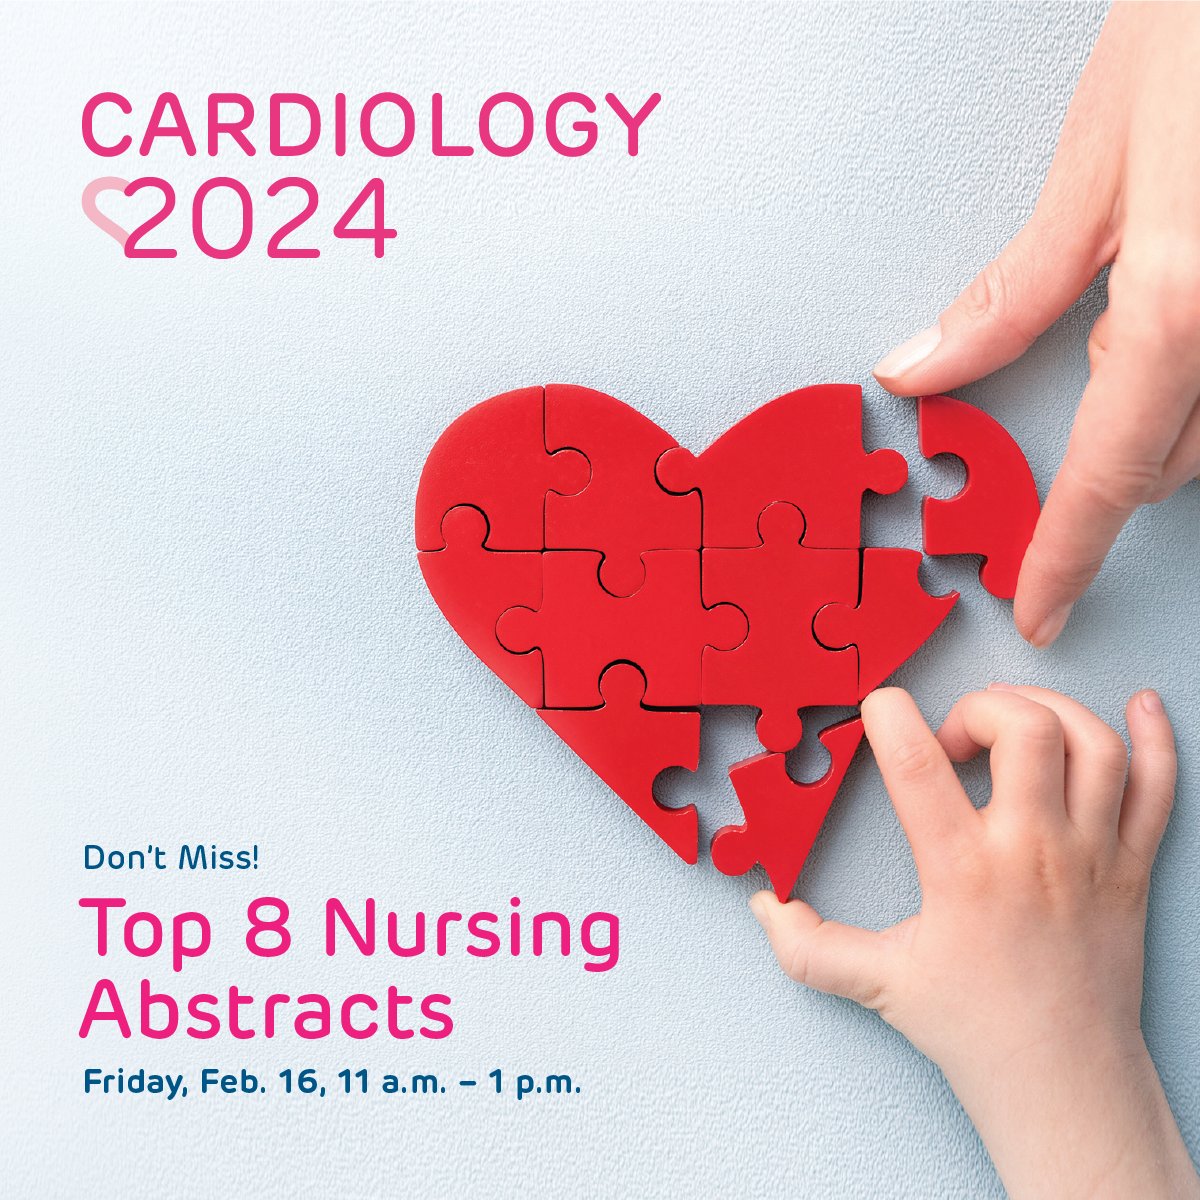 Congratulations and good luck to all of the #Cardiology2024 Nursing Oral Abstract presenters!